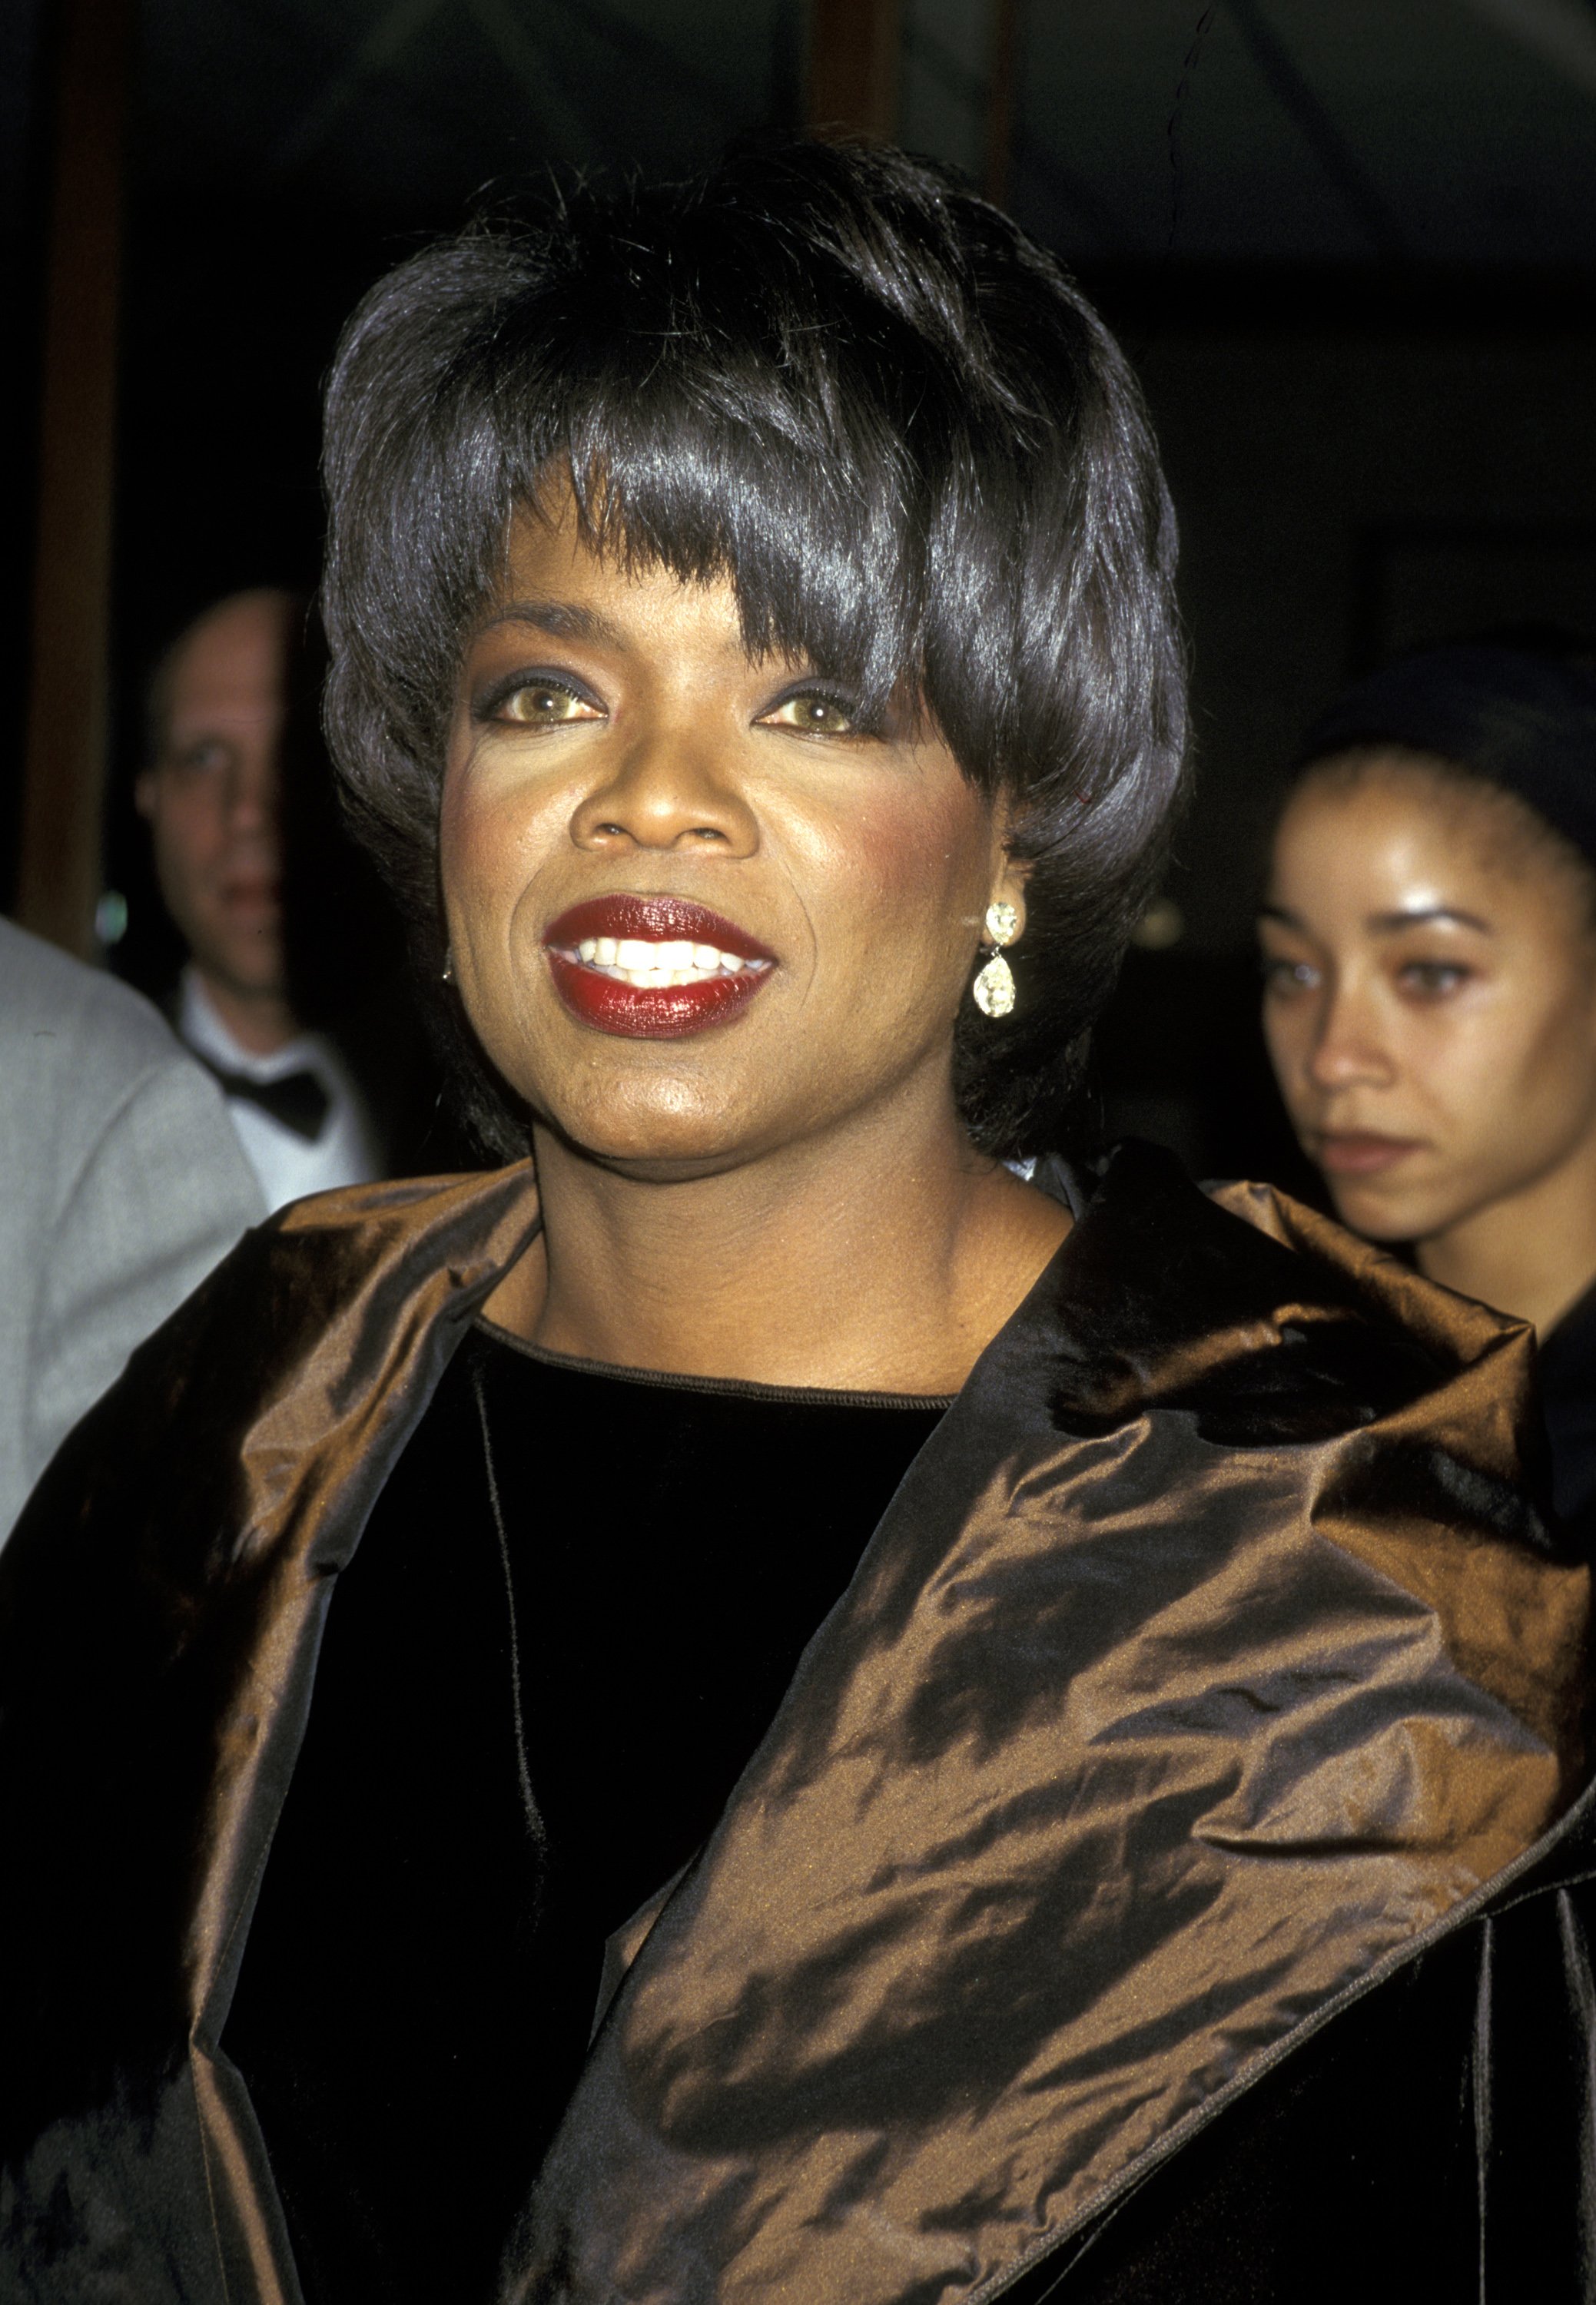 Oprah Winfrey at the opening night of Alvin Ailey Dance Performance in New York City, New York, on December 4, 1996. | Source: Getty Images